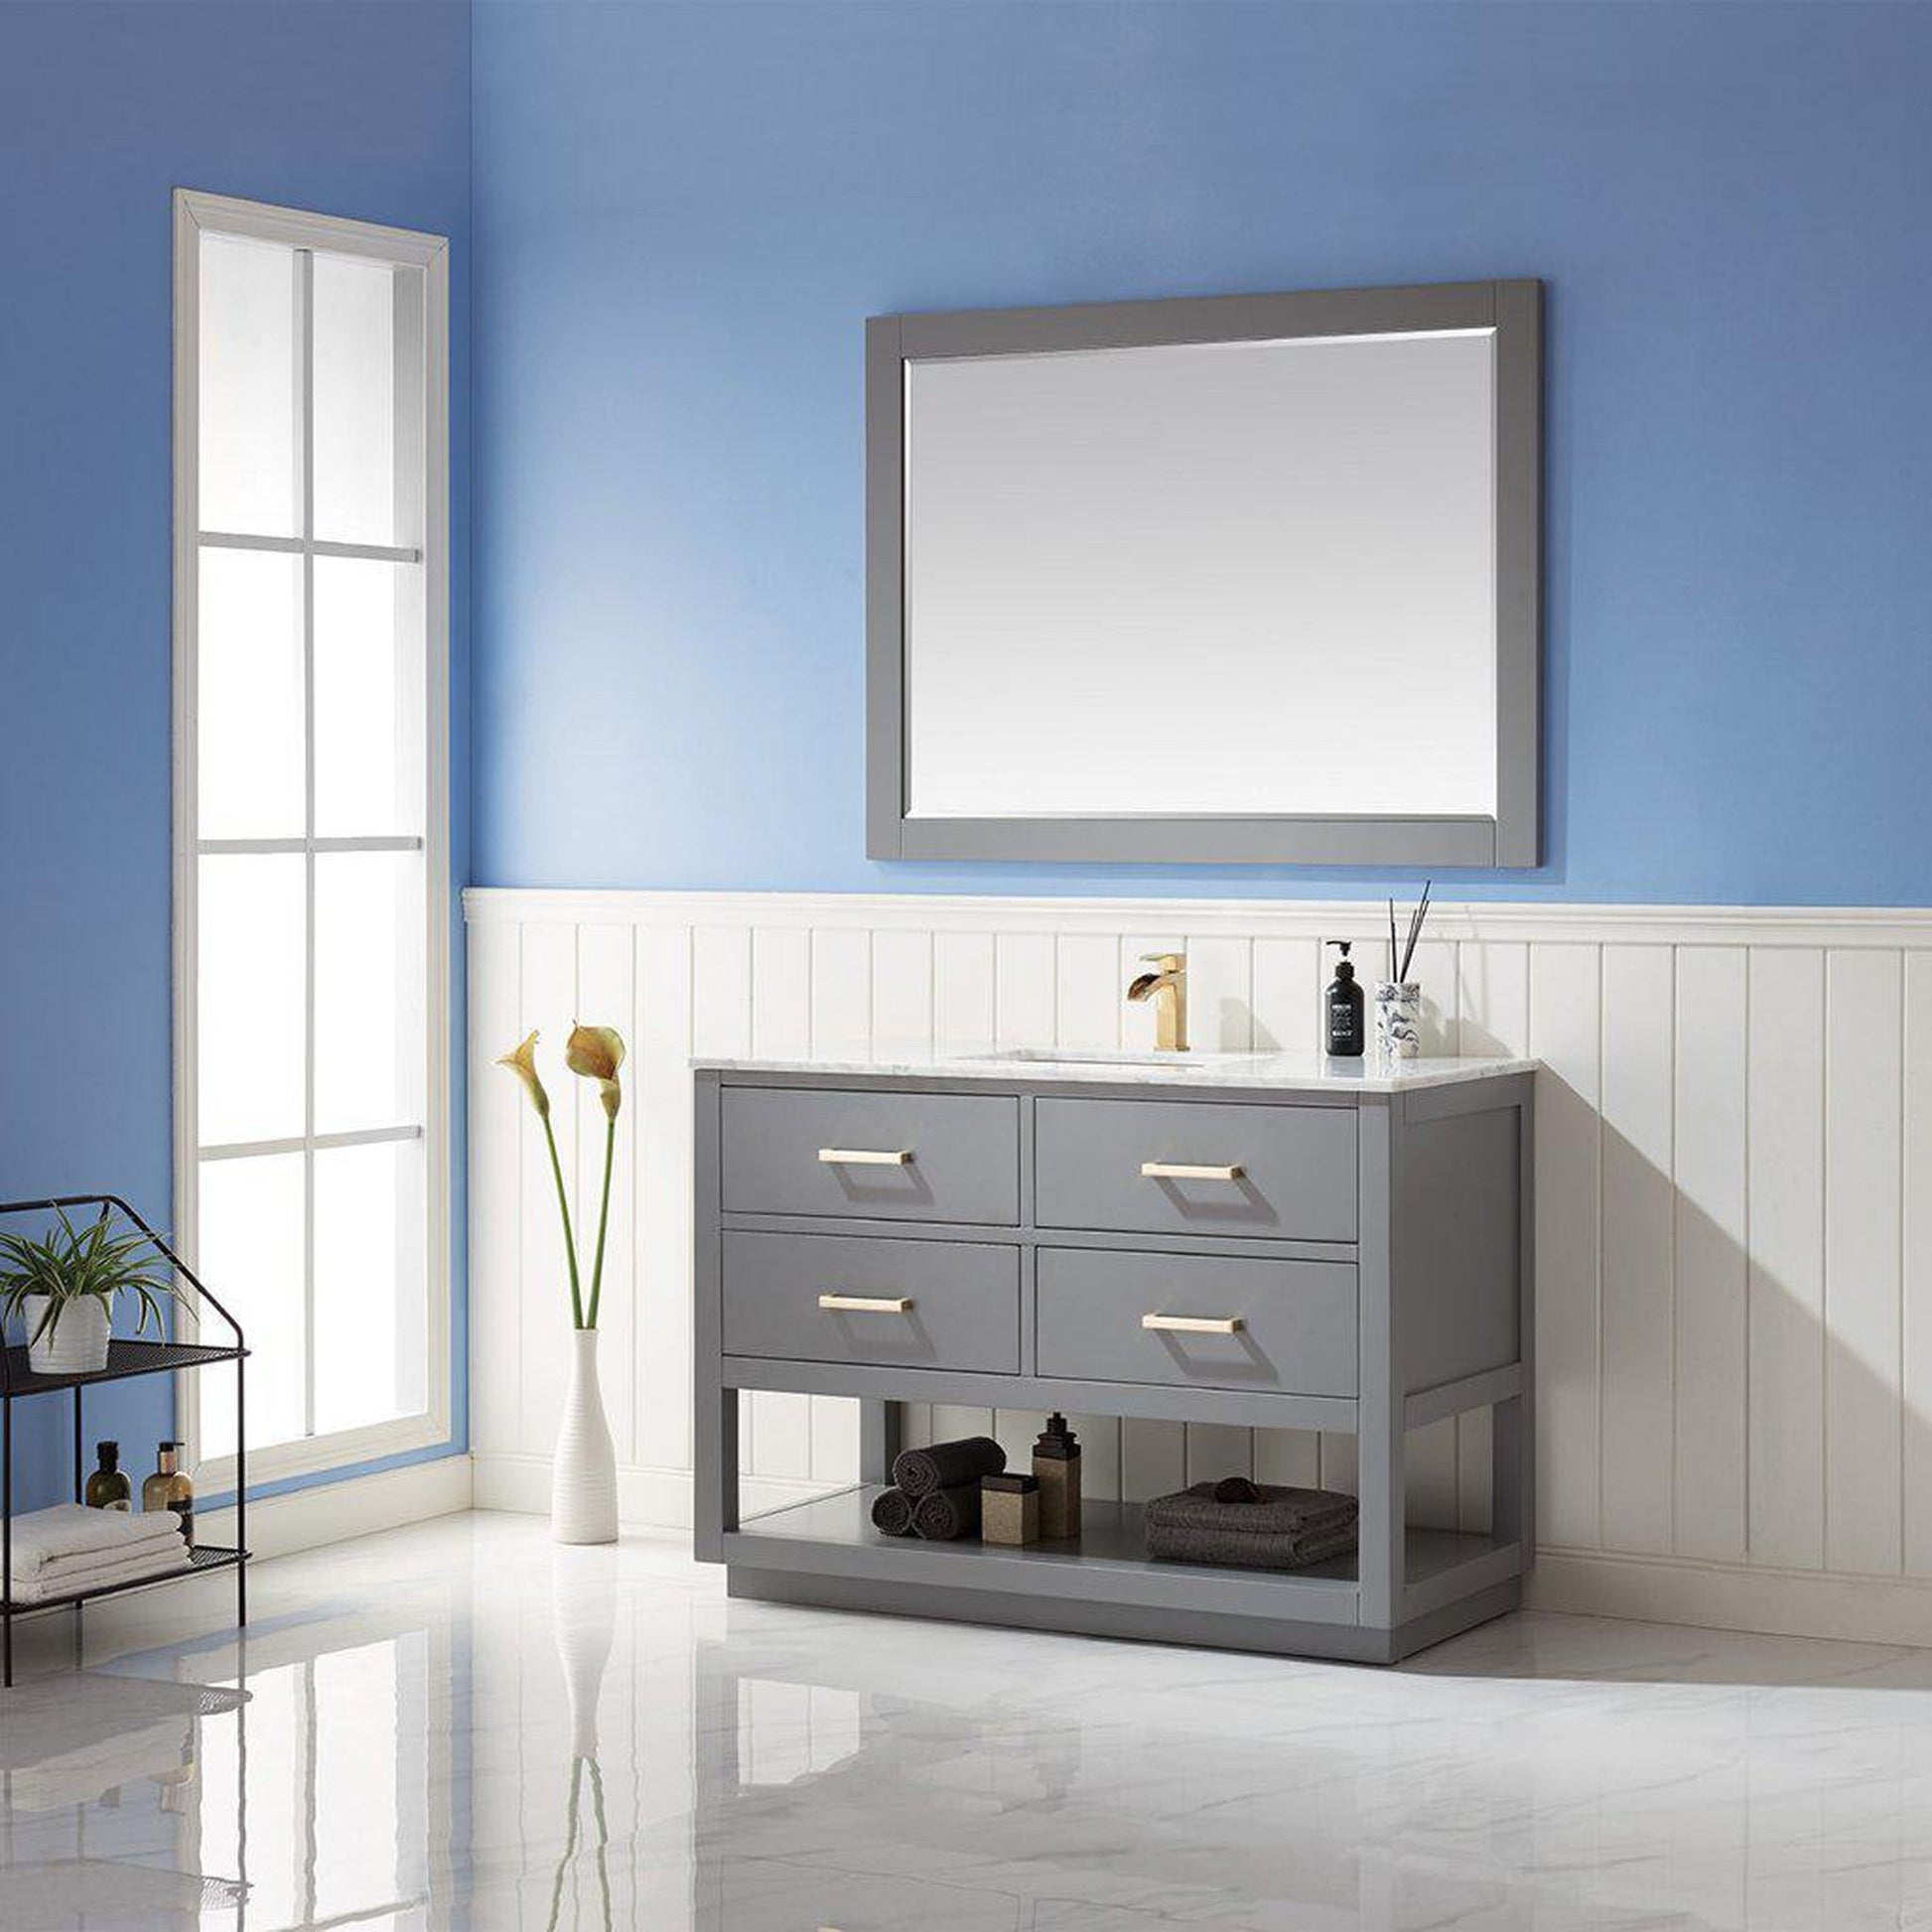 Altair Remi 48" Single Gray Freestanding Bathroom Vanity Set With Mirror, Natural Carrara White Marble Top, Rectangular Undermount Ceramic Sink, and Overflow